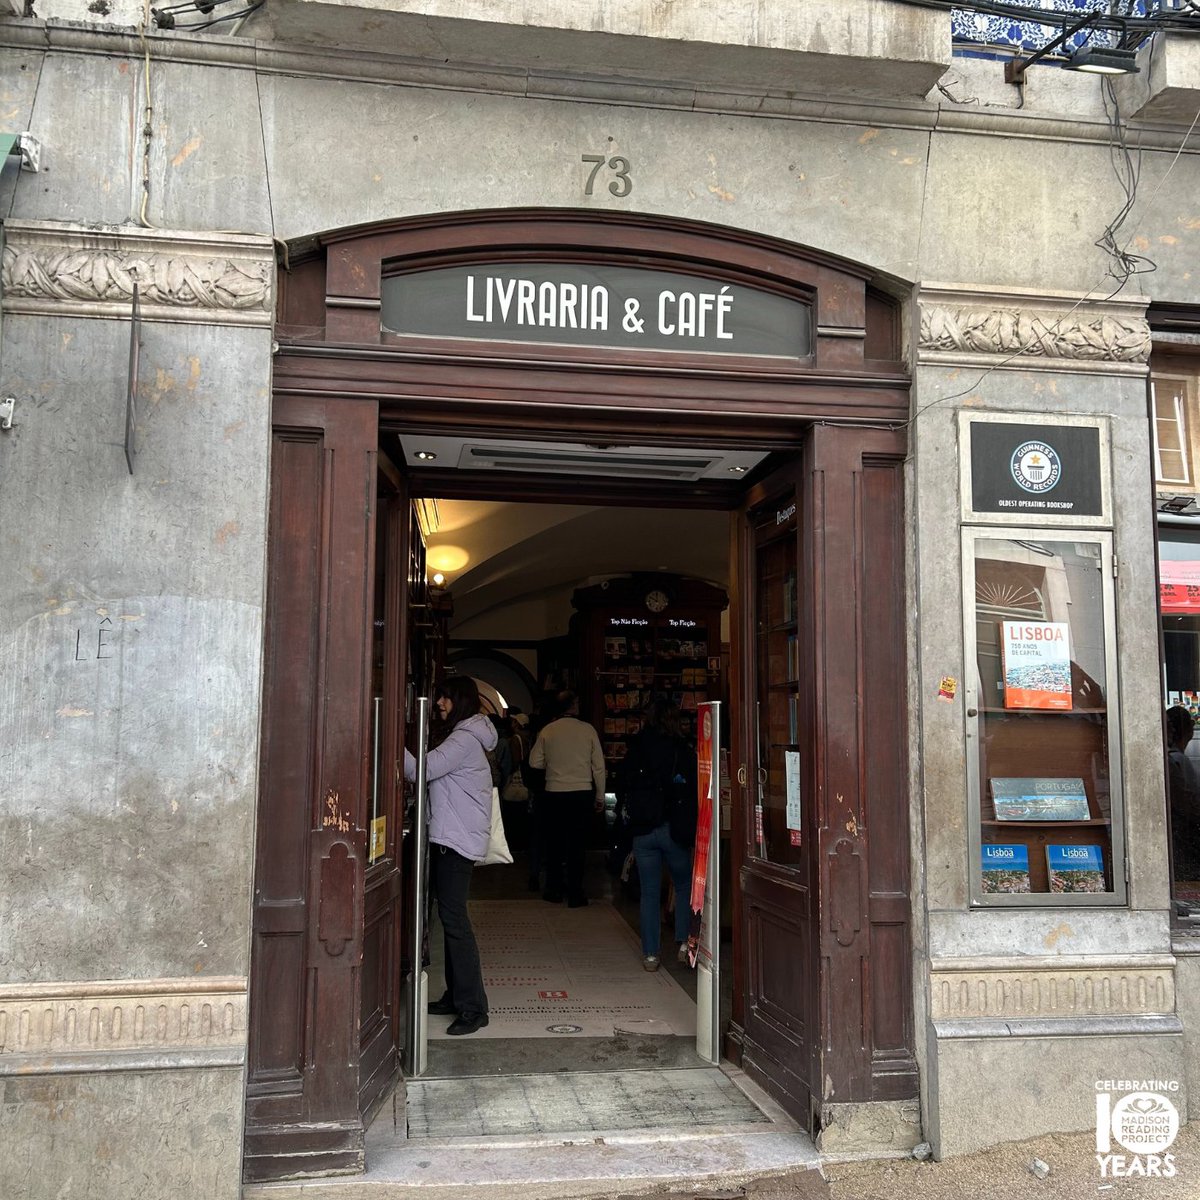 📚 Our team member Sarah recently visited Lisbon in Portugal and found the World’s Oldest Bookstore! 🏆 How fun is that?! It's called Livraria Bertrand and was founded in 1732. 

#NewBookFeeling #MadisonWi #LiteracyMatters #WorldsOldestBookstore #BooksRule